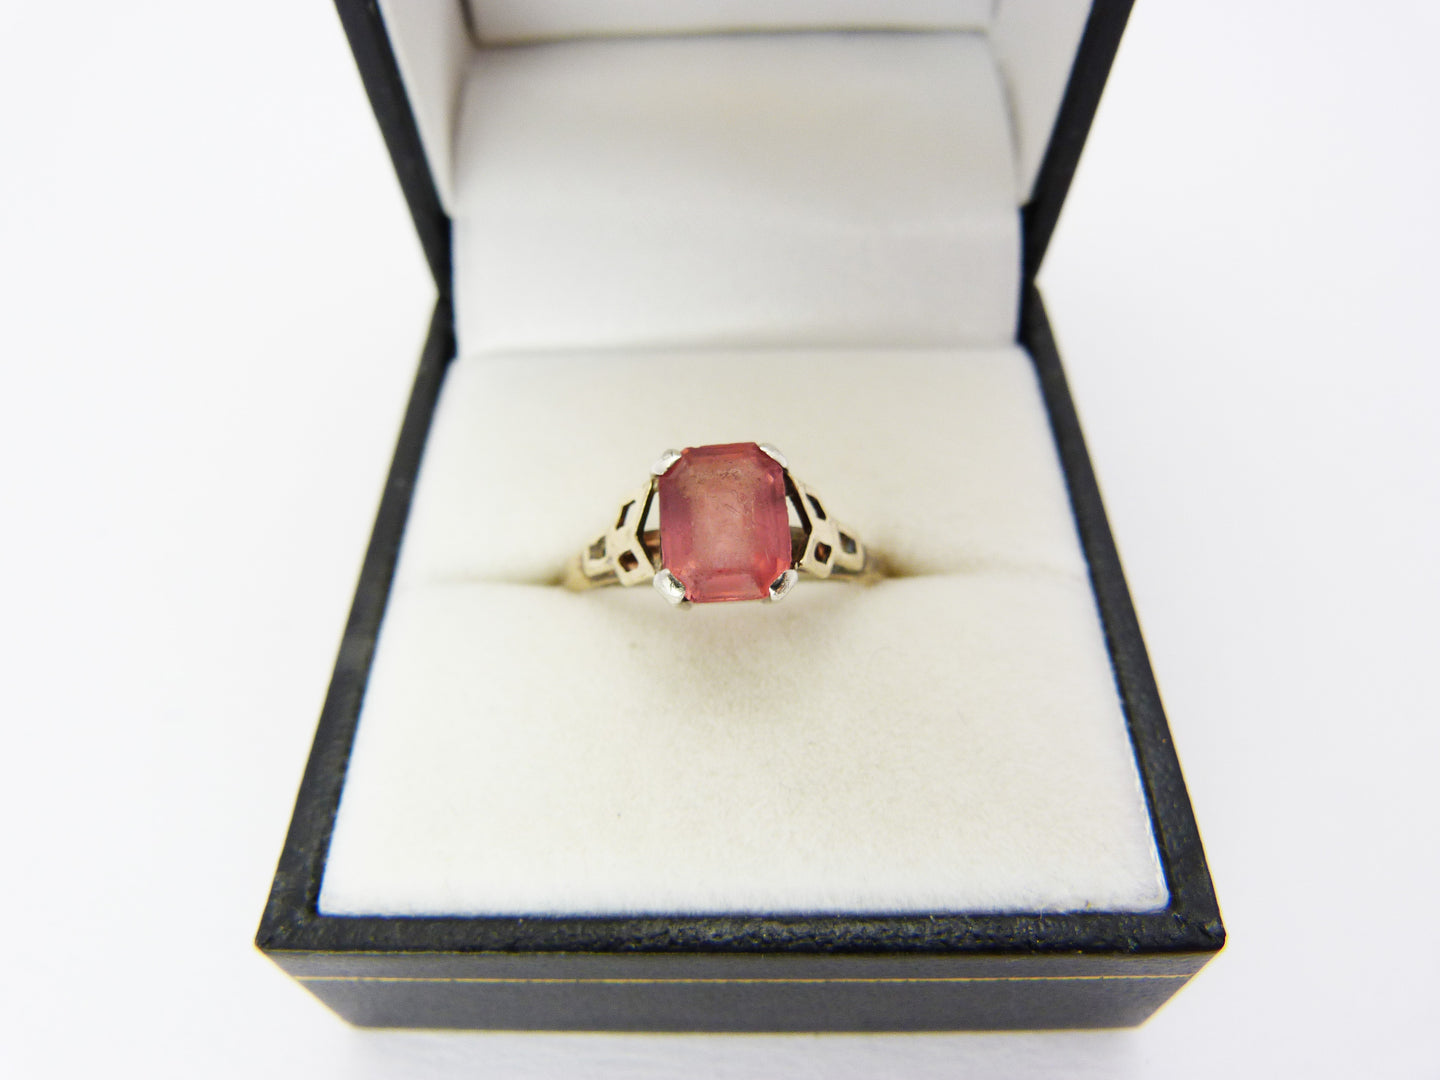 Art Deco H.G. & Sons 9ct Gold and Silver Pink Tourmaline Paste Ring UK Size P - US Size 7.5 - Henry Griffiths and Sons